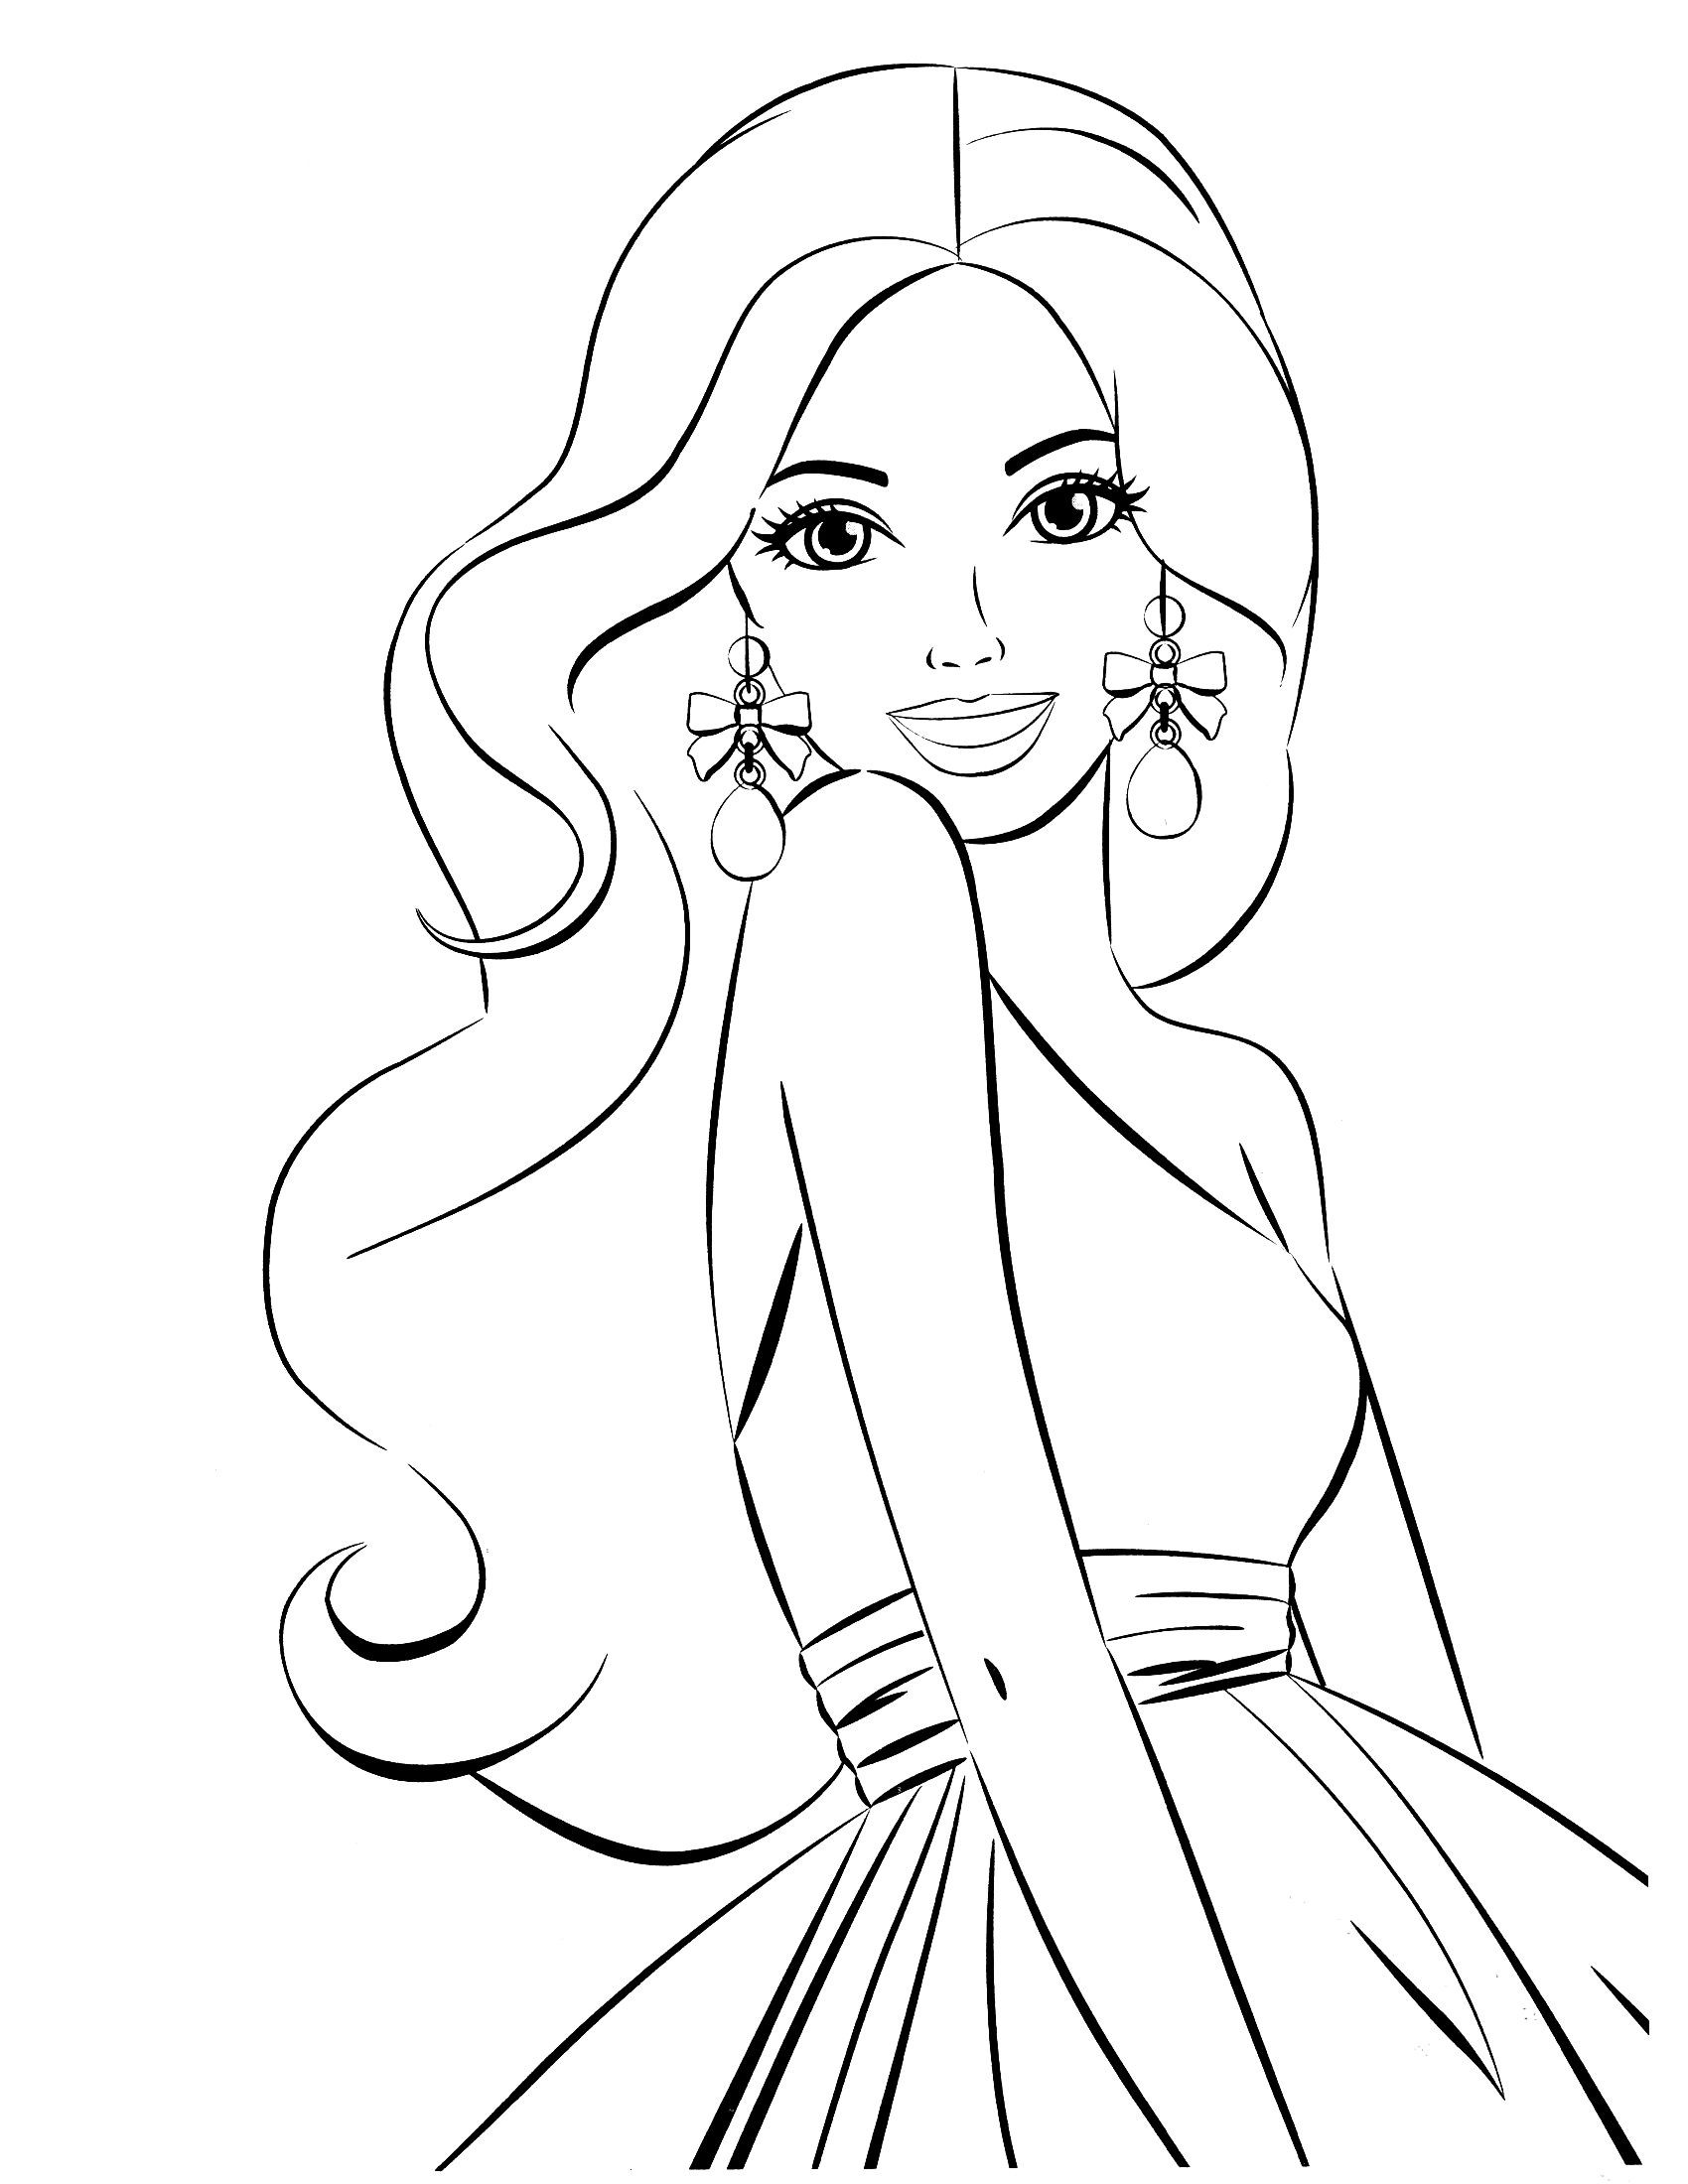 Download The Best Ideas for Barbie Coloring Pages for Girls - Home ...